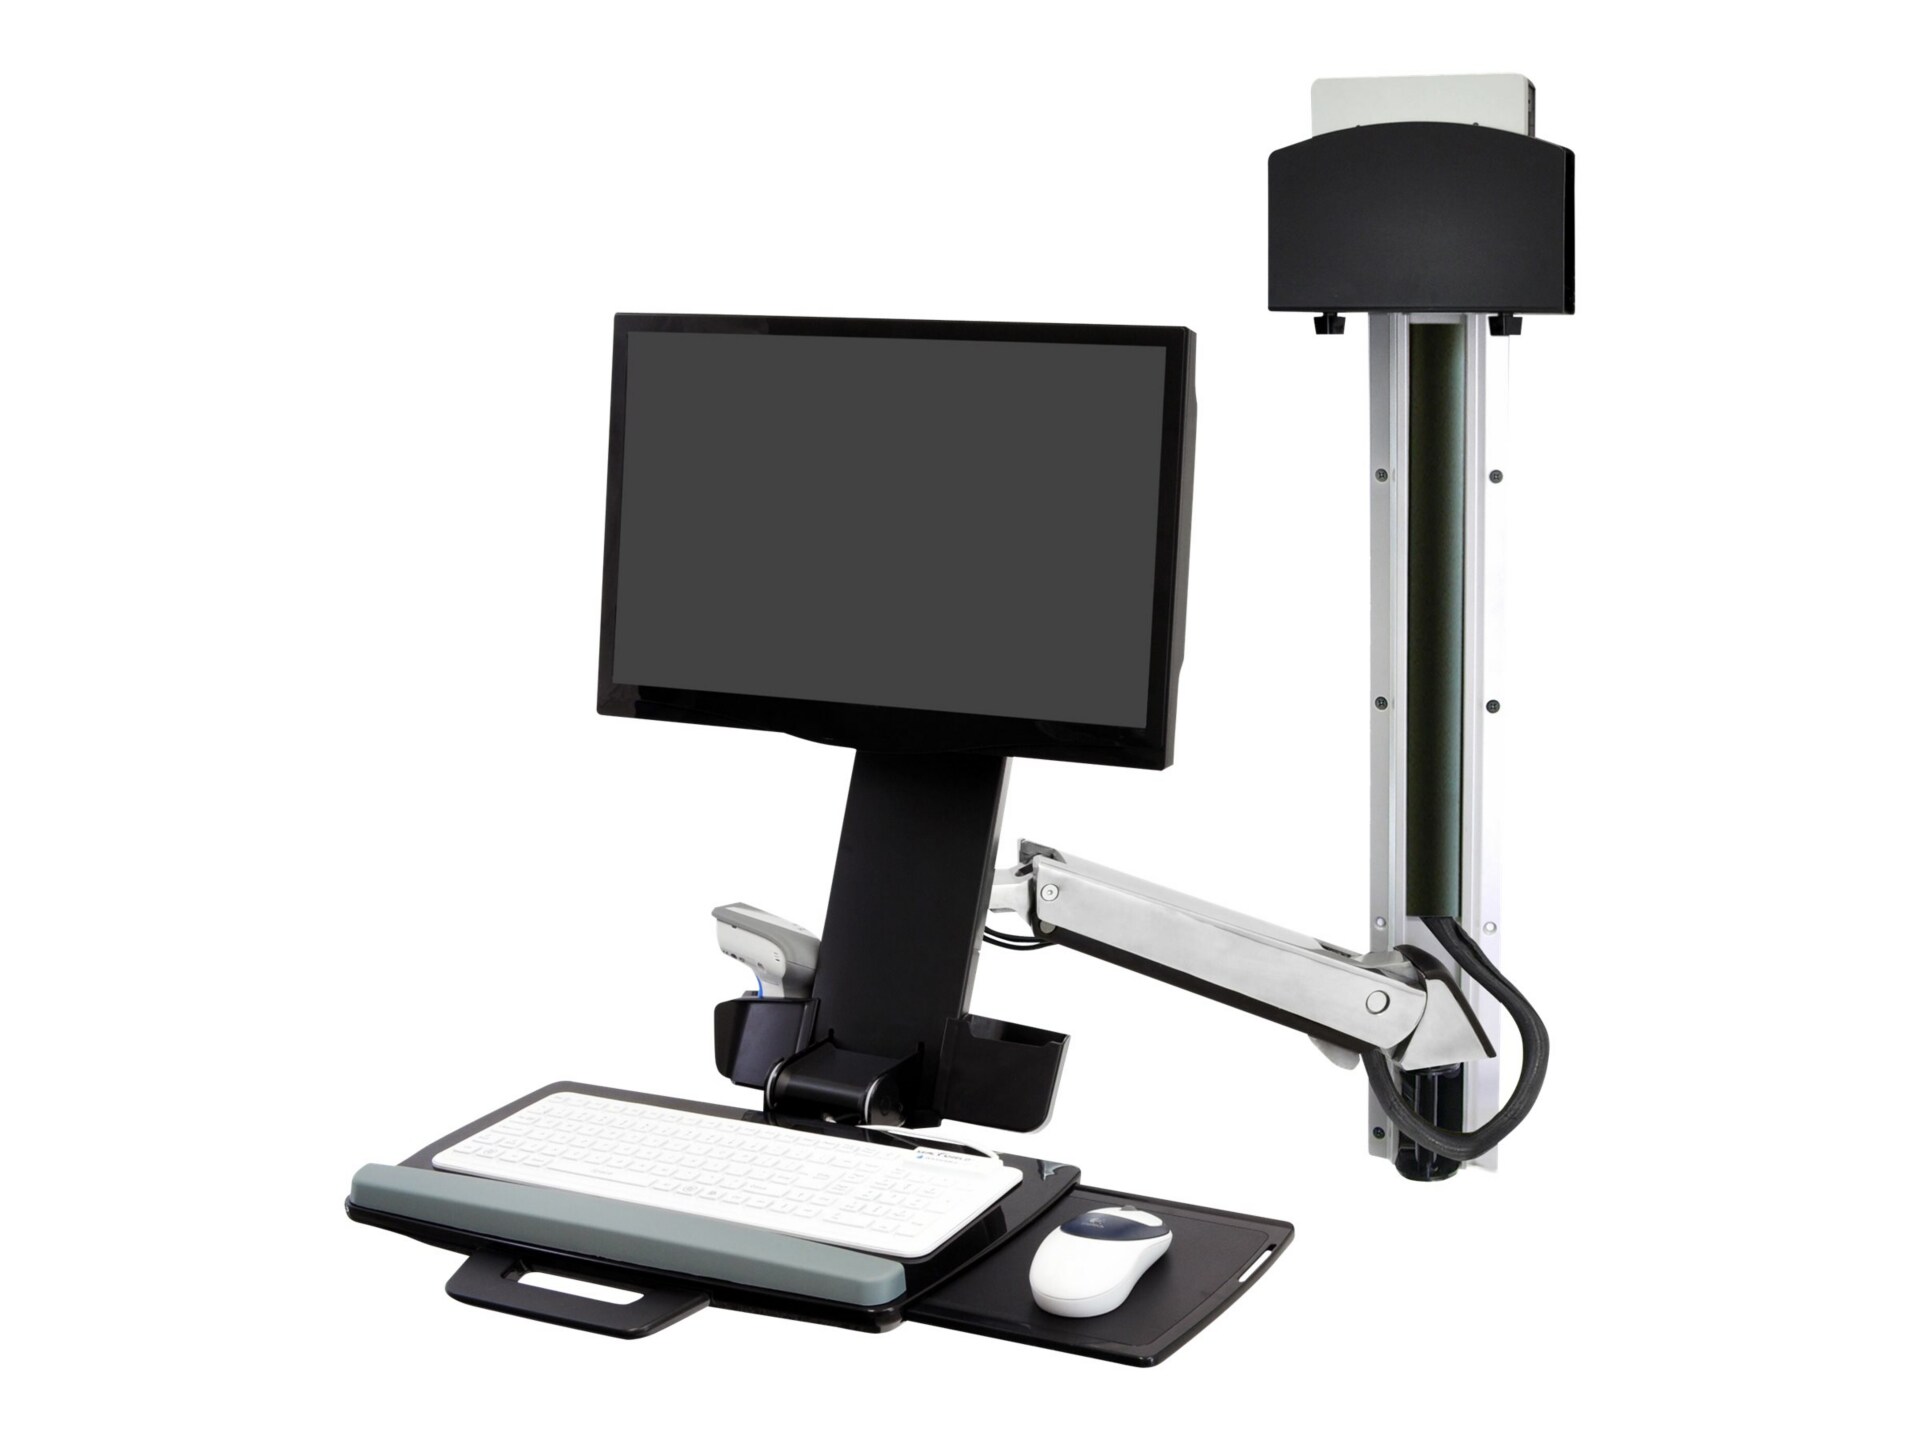 Ergotron StyleView Sit-Stand Combo System mounting kit - for LCD display /